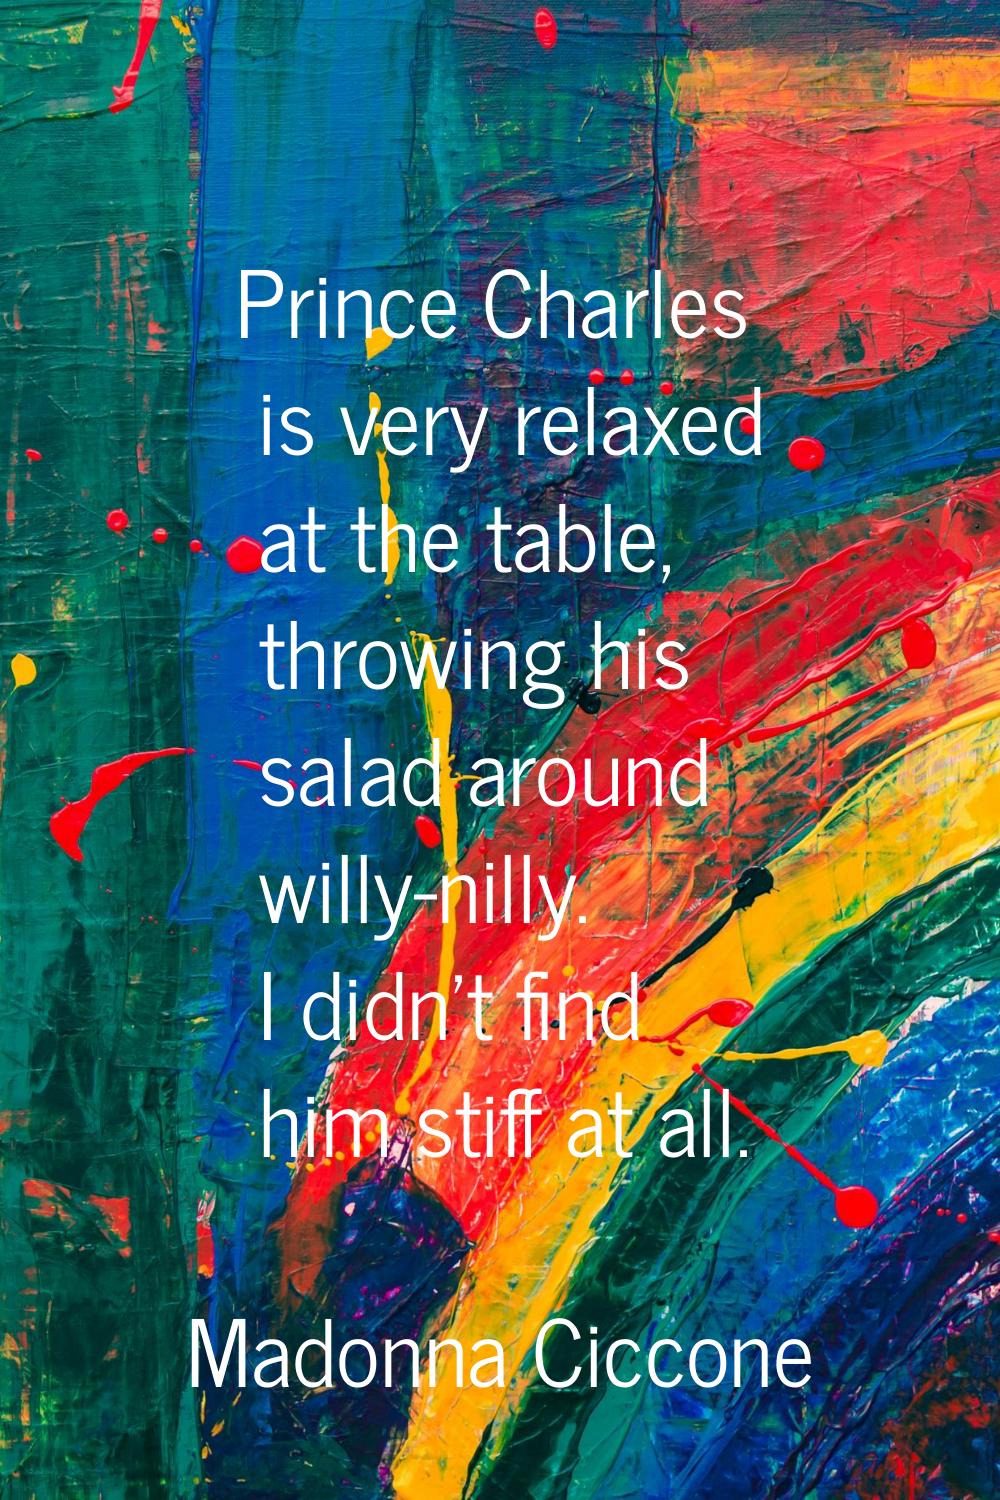 Prince Charles is very relaxed at the table, throwing his salad around willy-nilly. I didn't find h